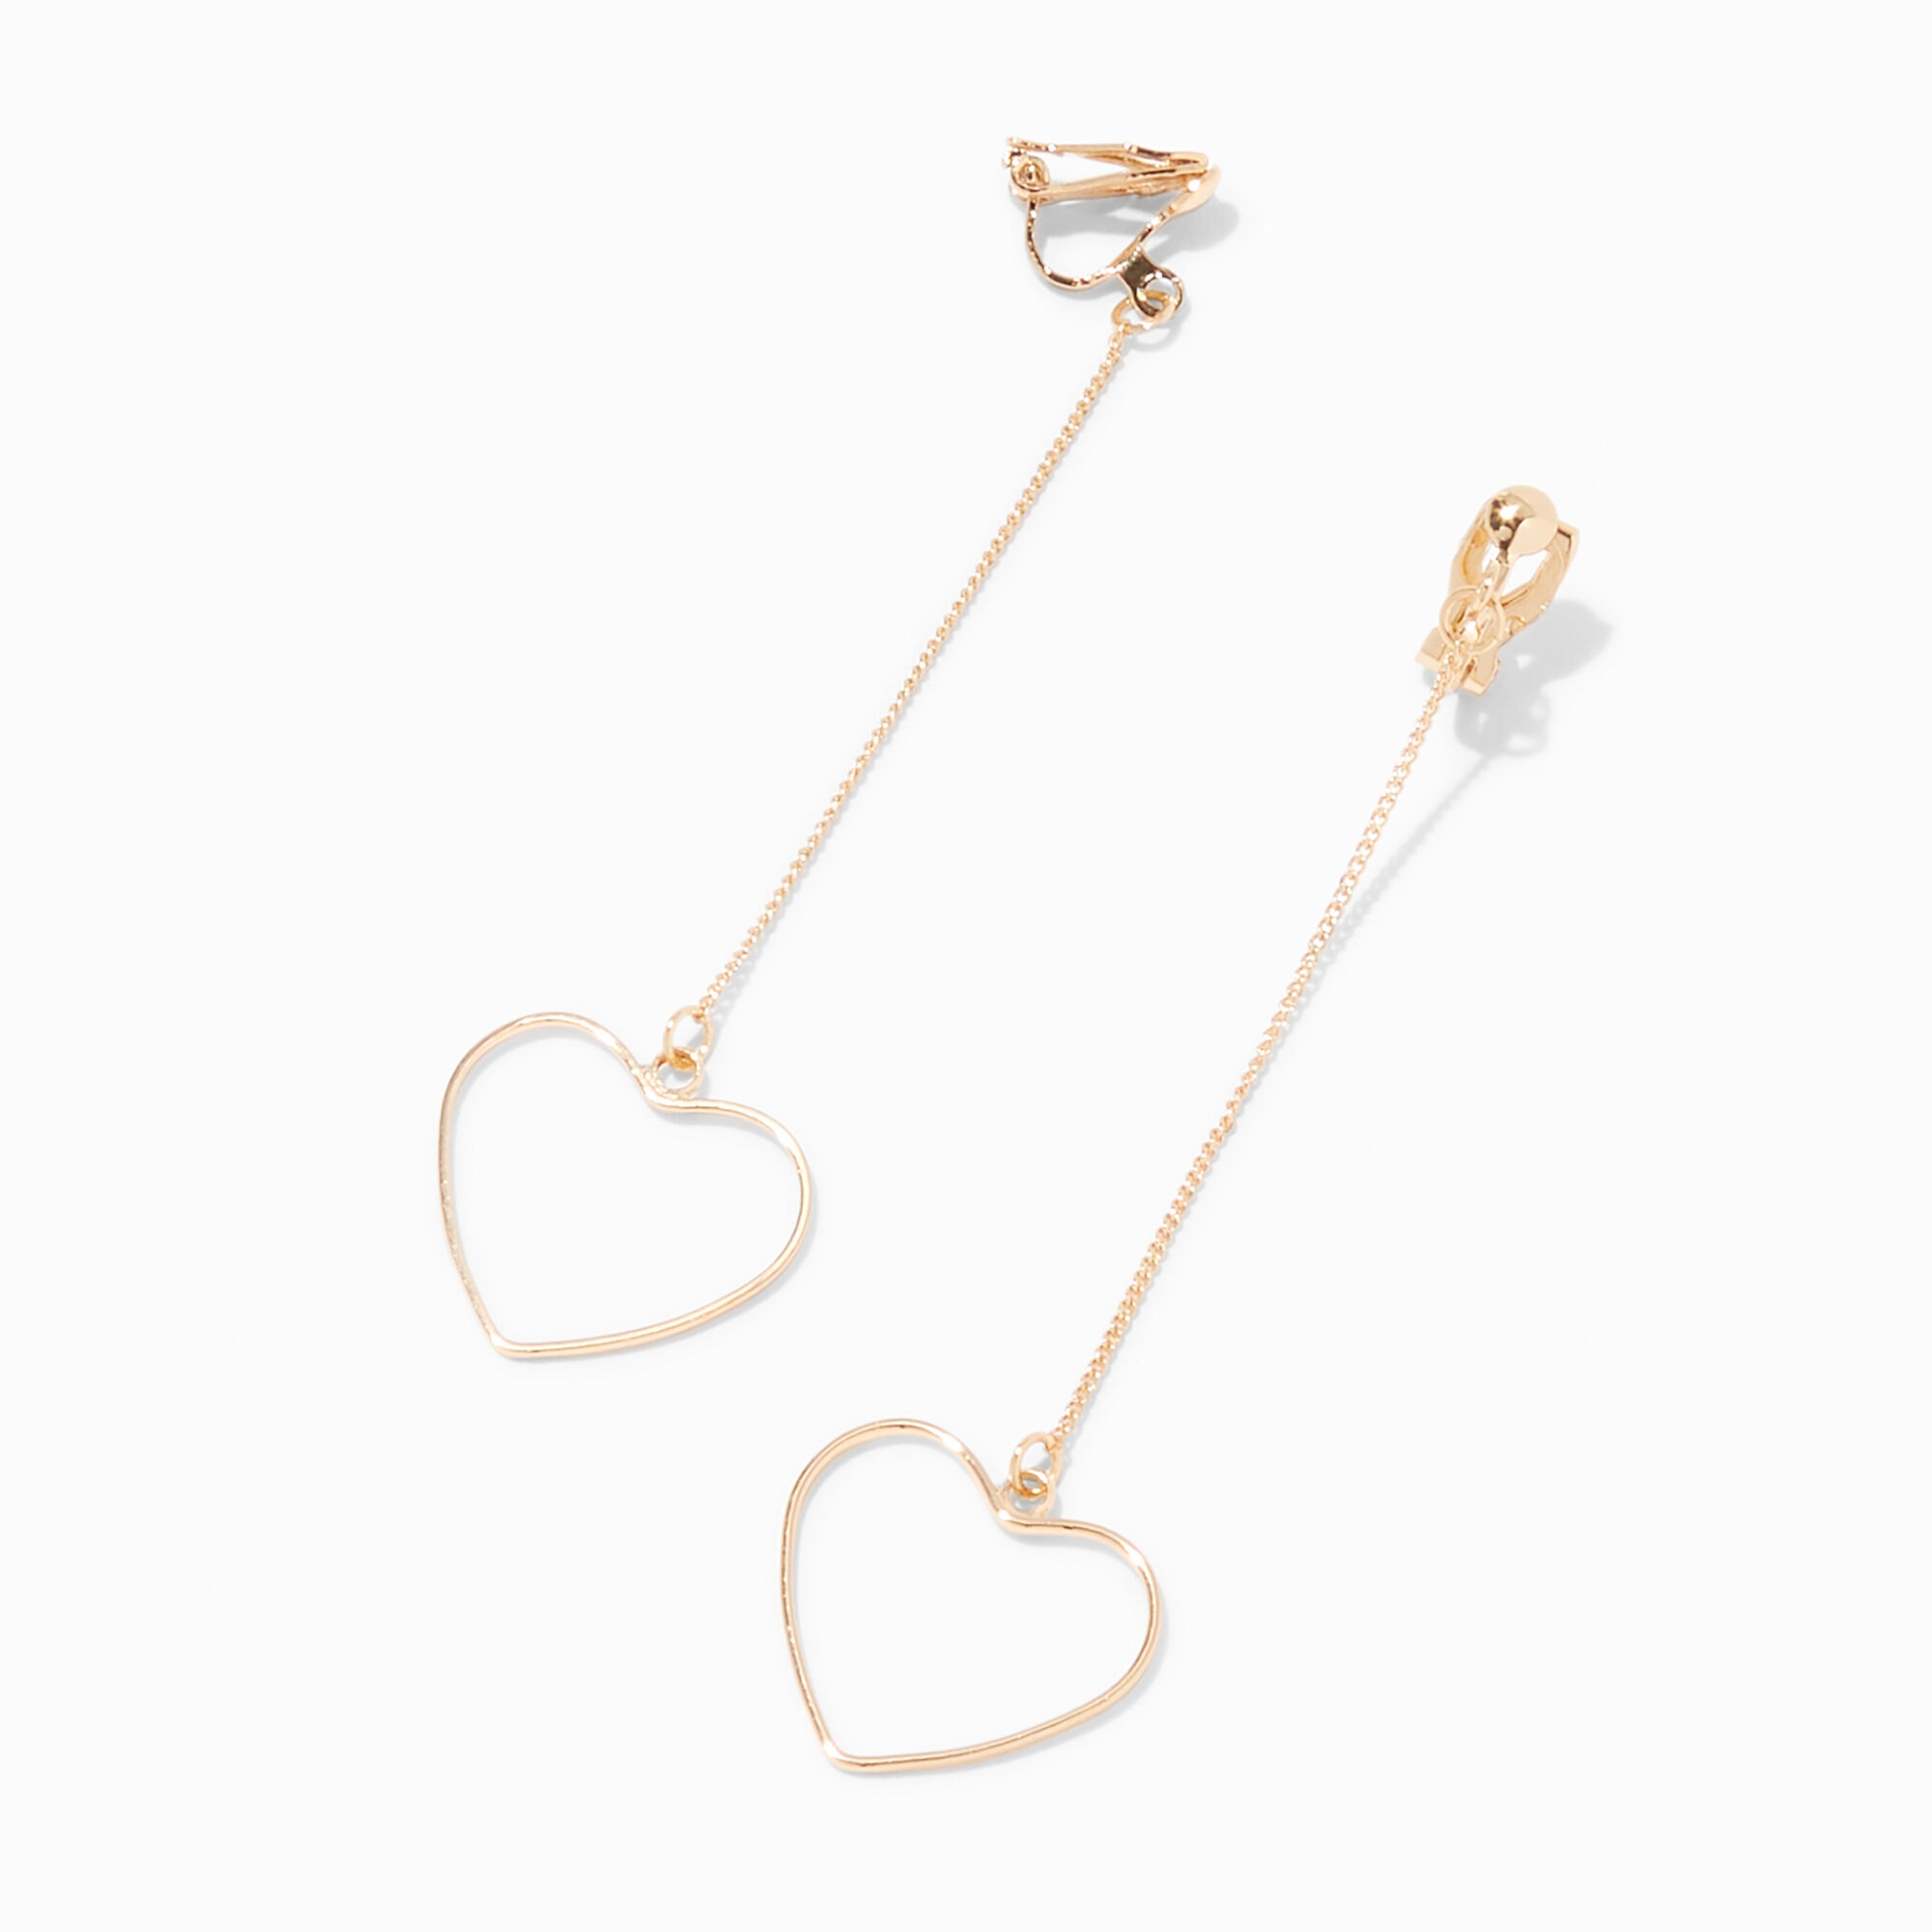 View Claires 3 Heart Linear ClipOn Drop Earrings Gold information